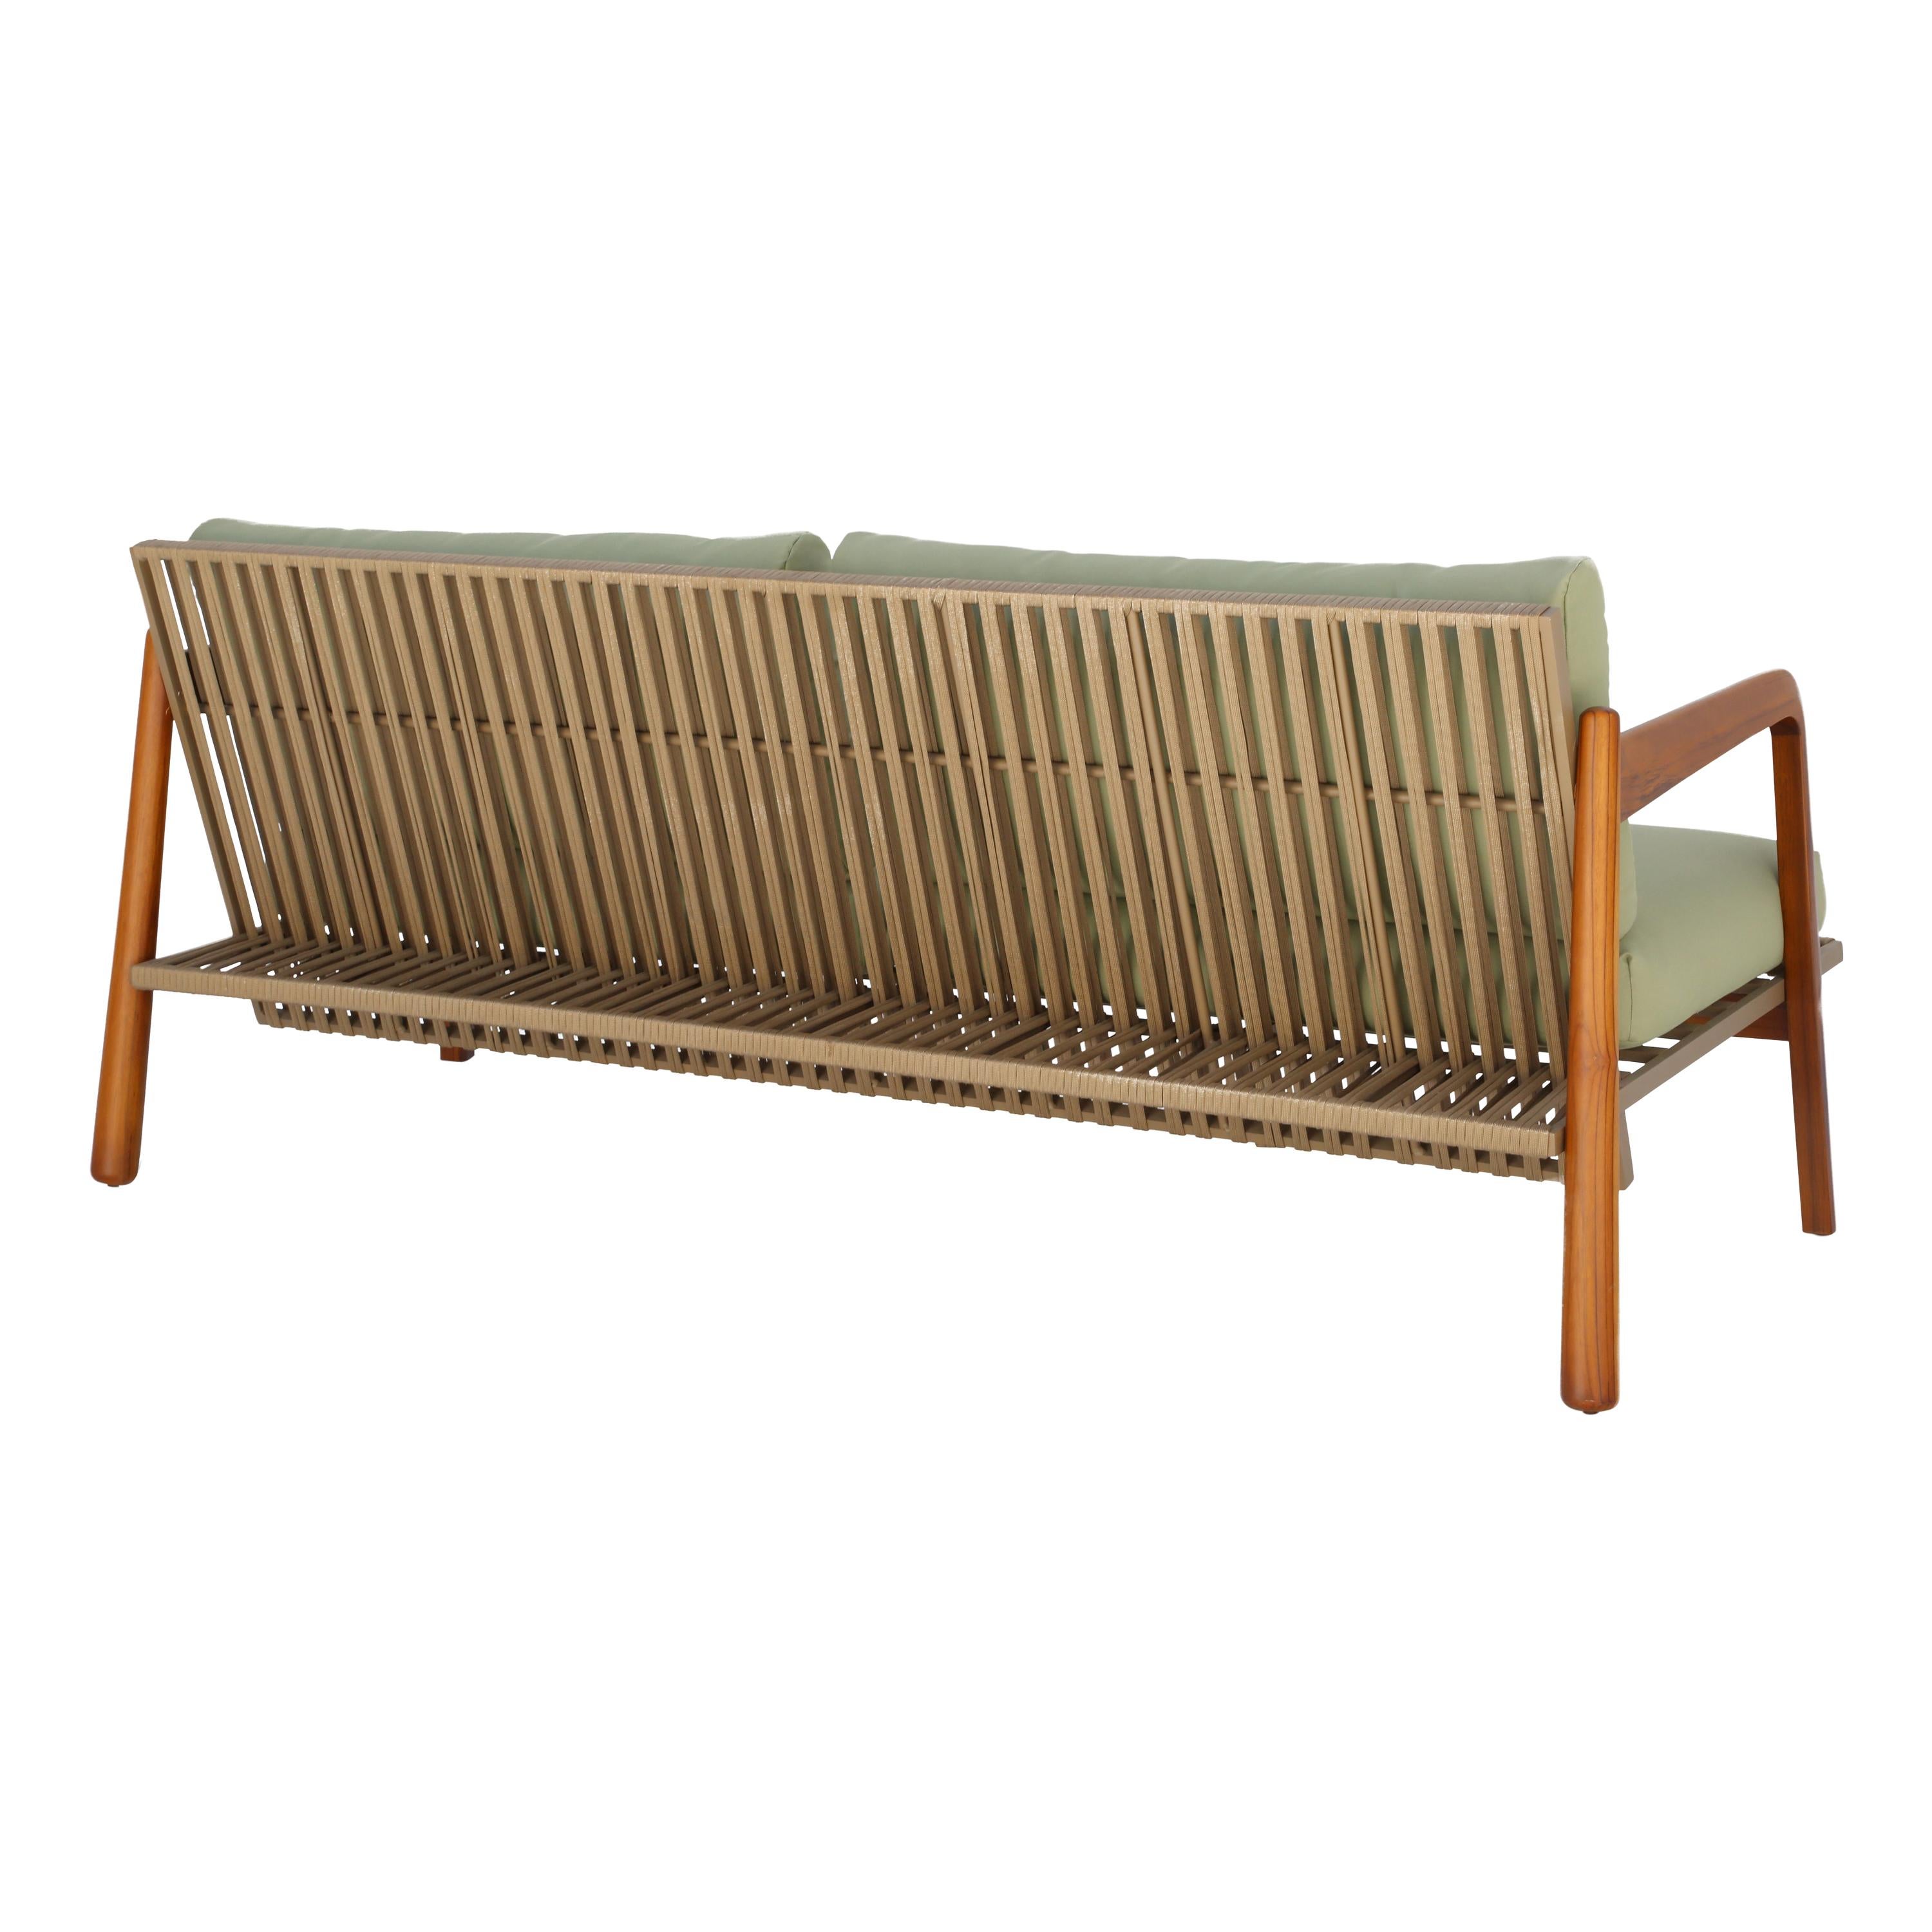 "Sancho" Outdoor Couch in Natural Teak Wood Aluminum and Naval Rope by Hand